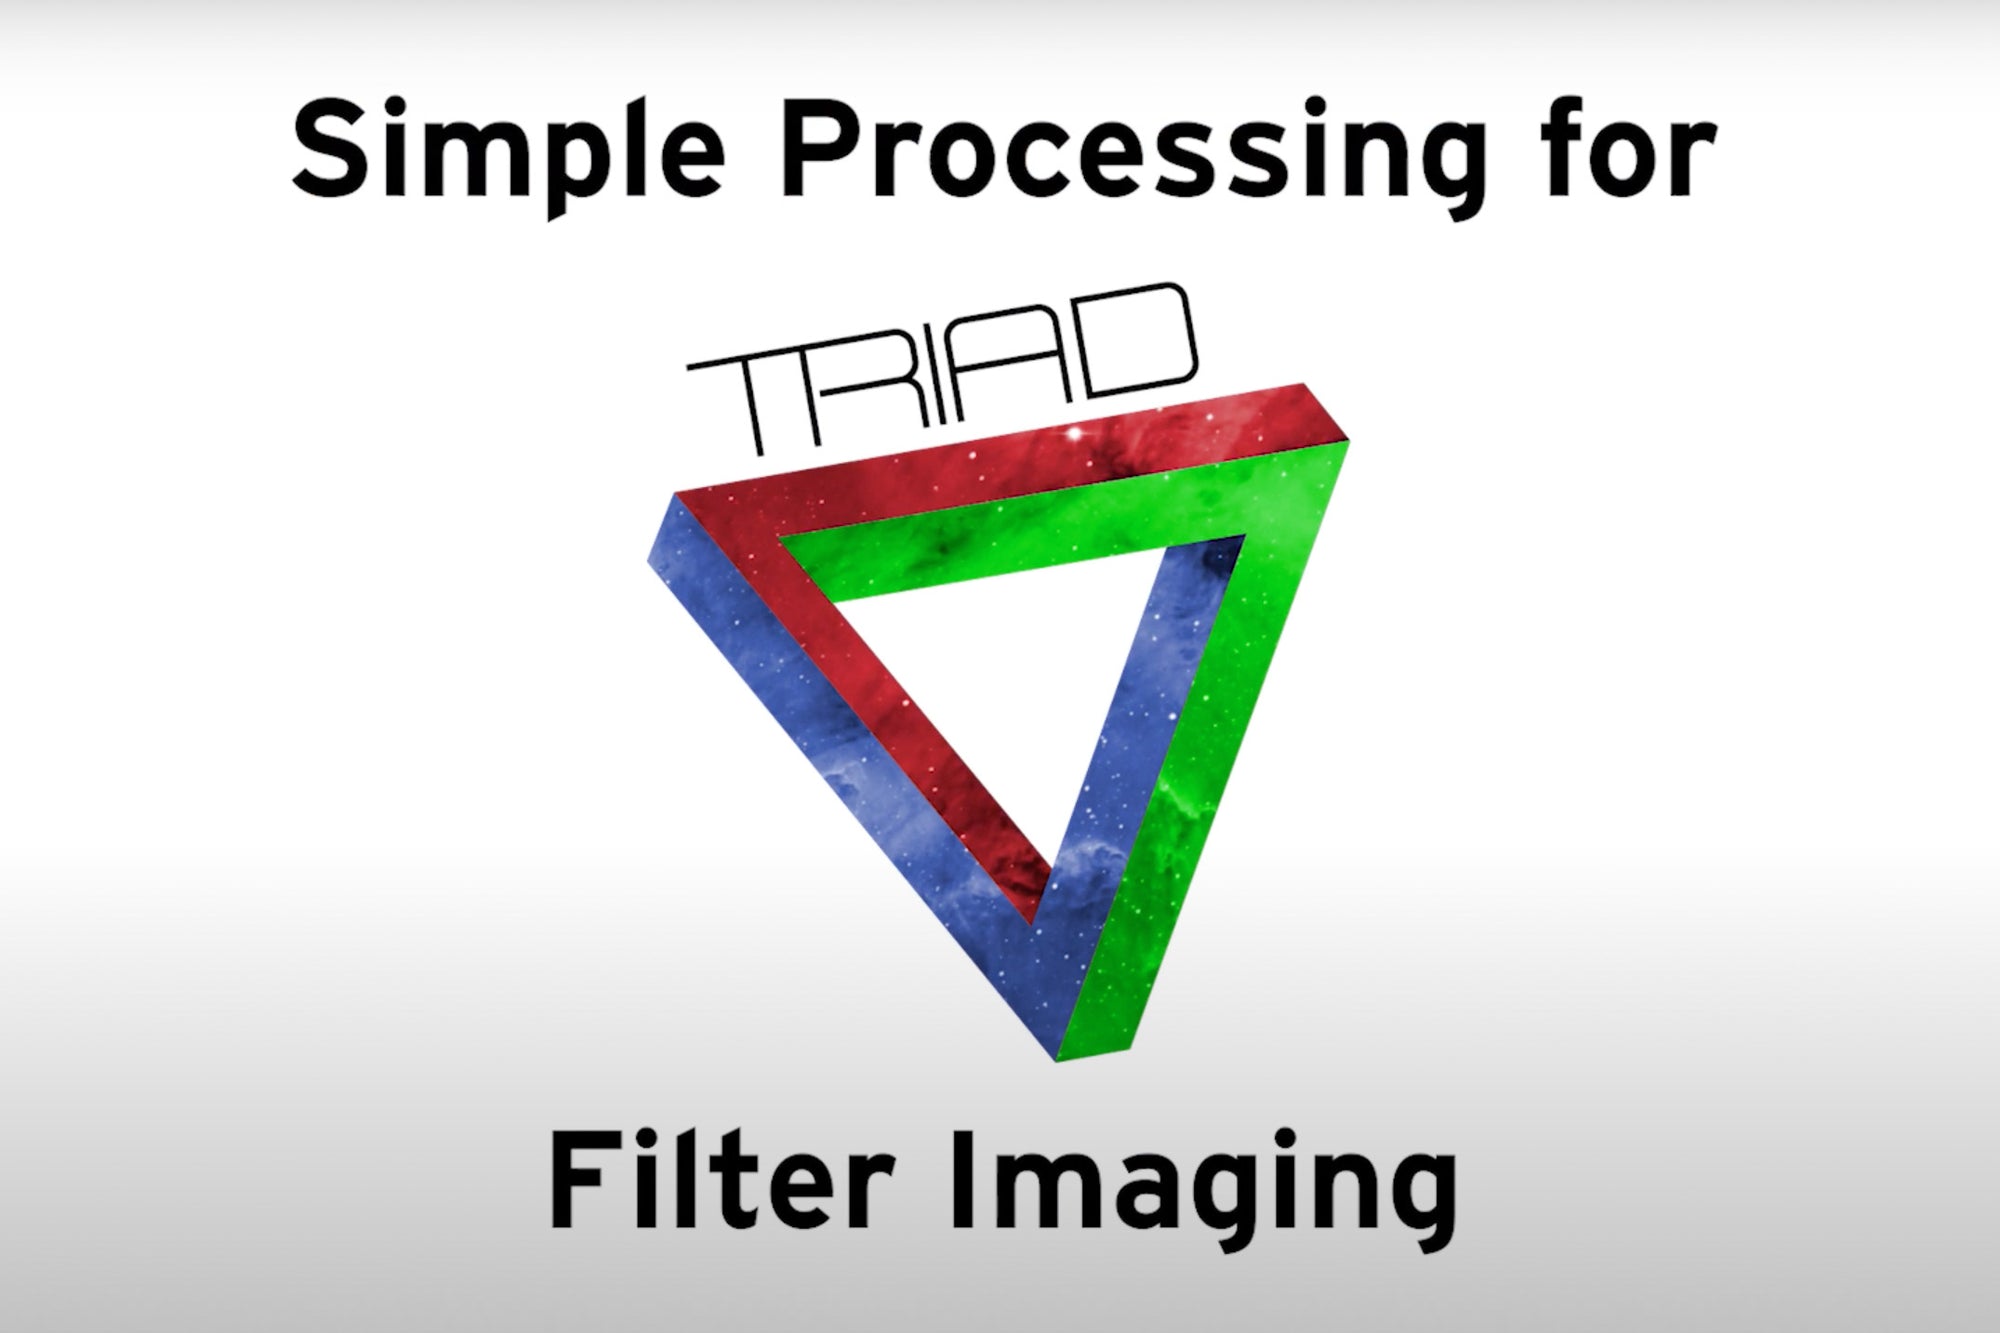 Simple Processing for Triad Filter Imaging